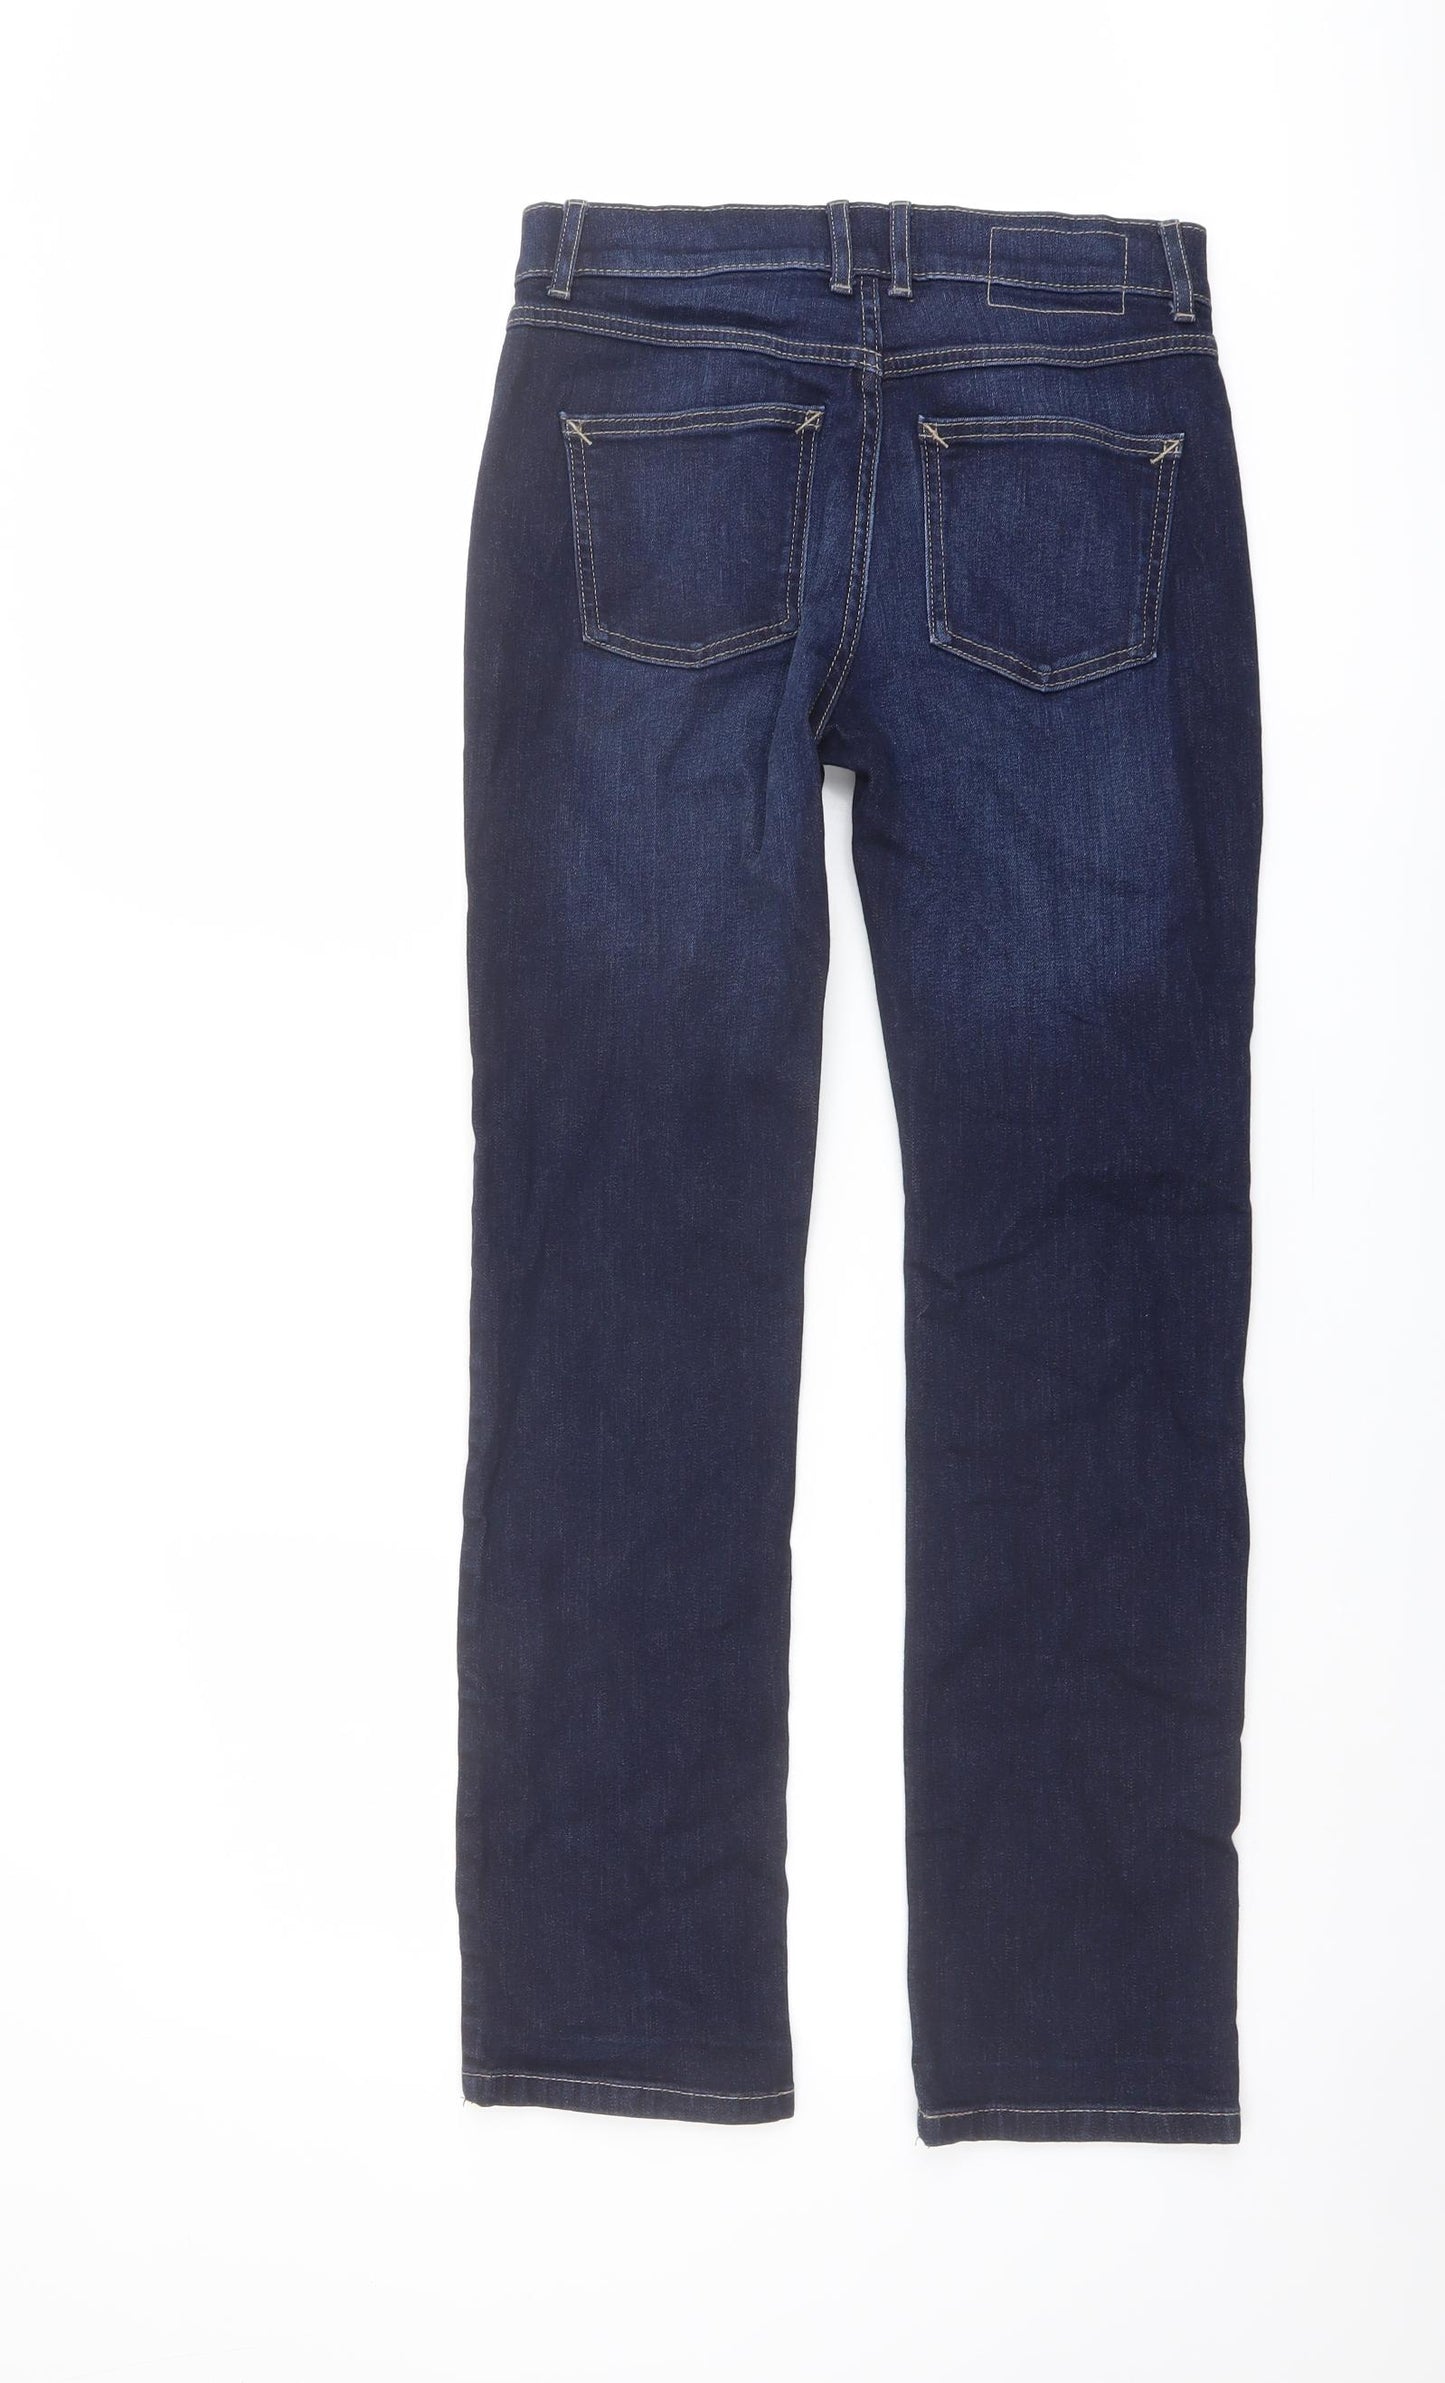 Marks and Spencer Womens Blue Cotton Straight Jeans Size 8 L29 in Regular Button